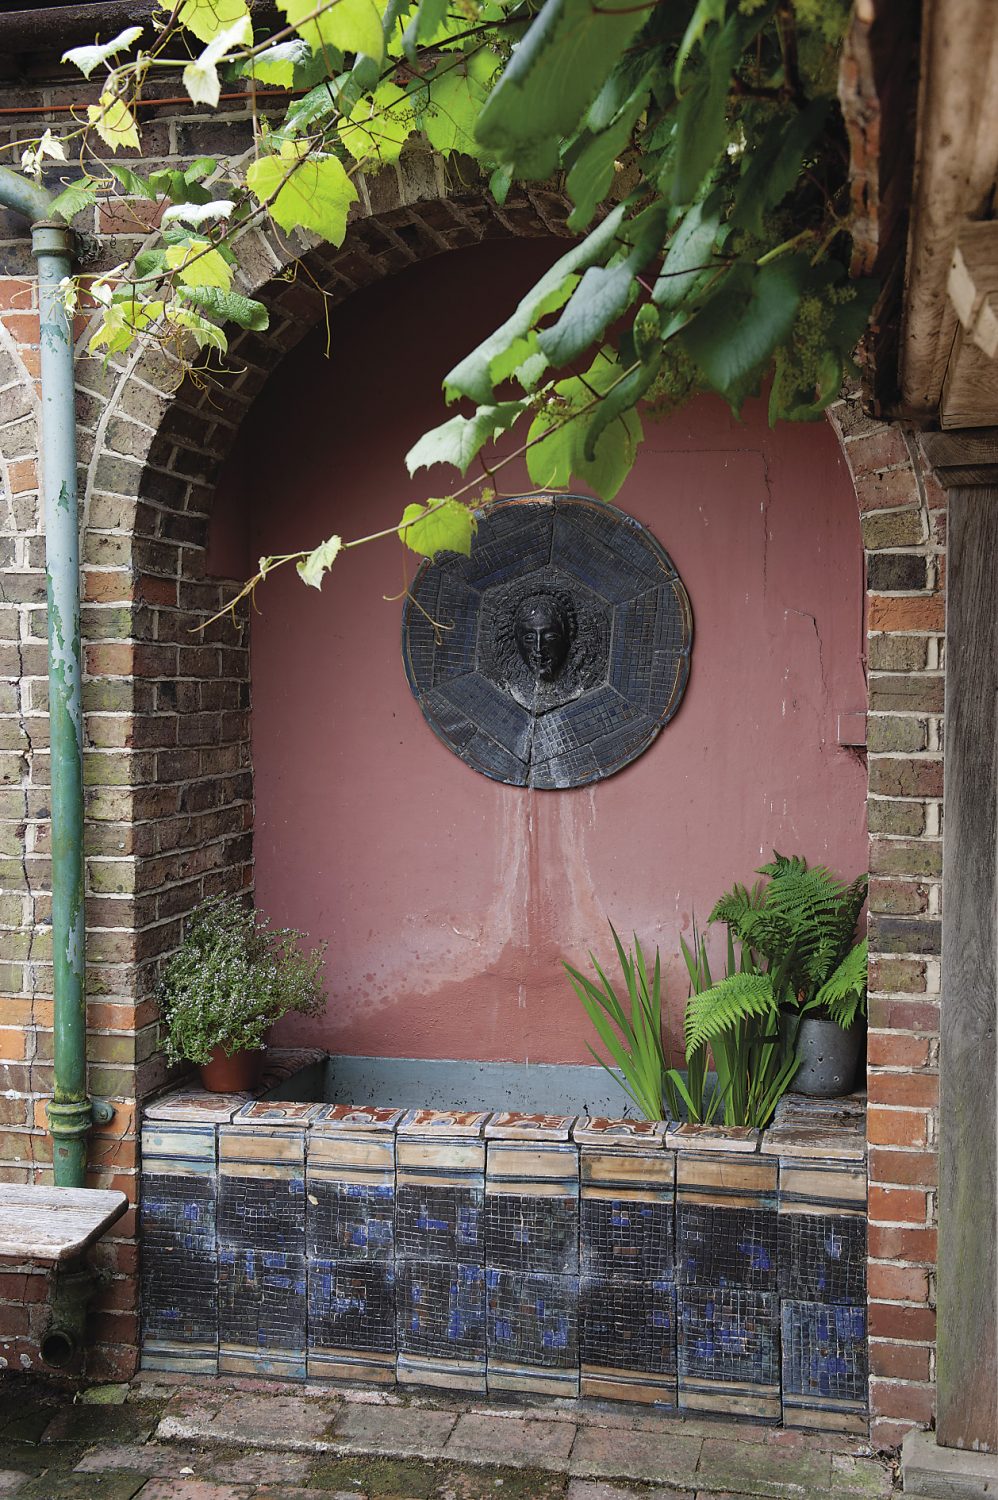 The tiled fountain that Duncan Bell created. “We’ve just got it working again and it’s wonderful to have the tinkling sound of the water carrying through into the house,” says Polly